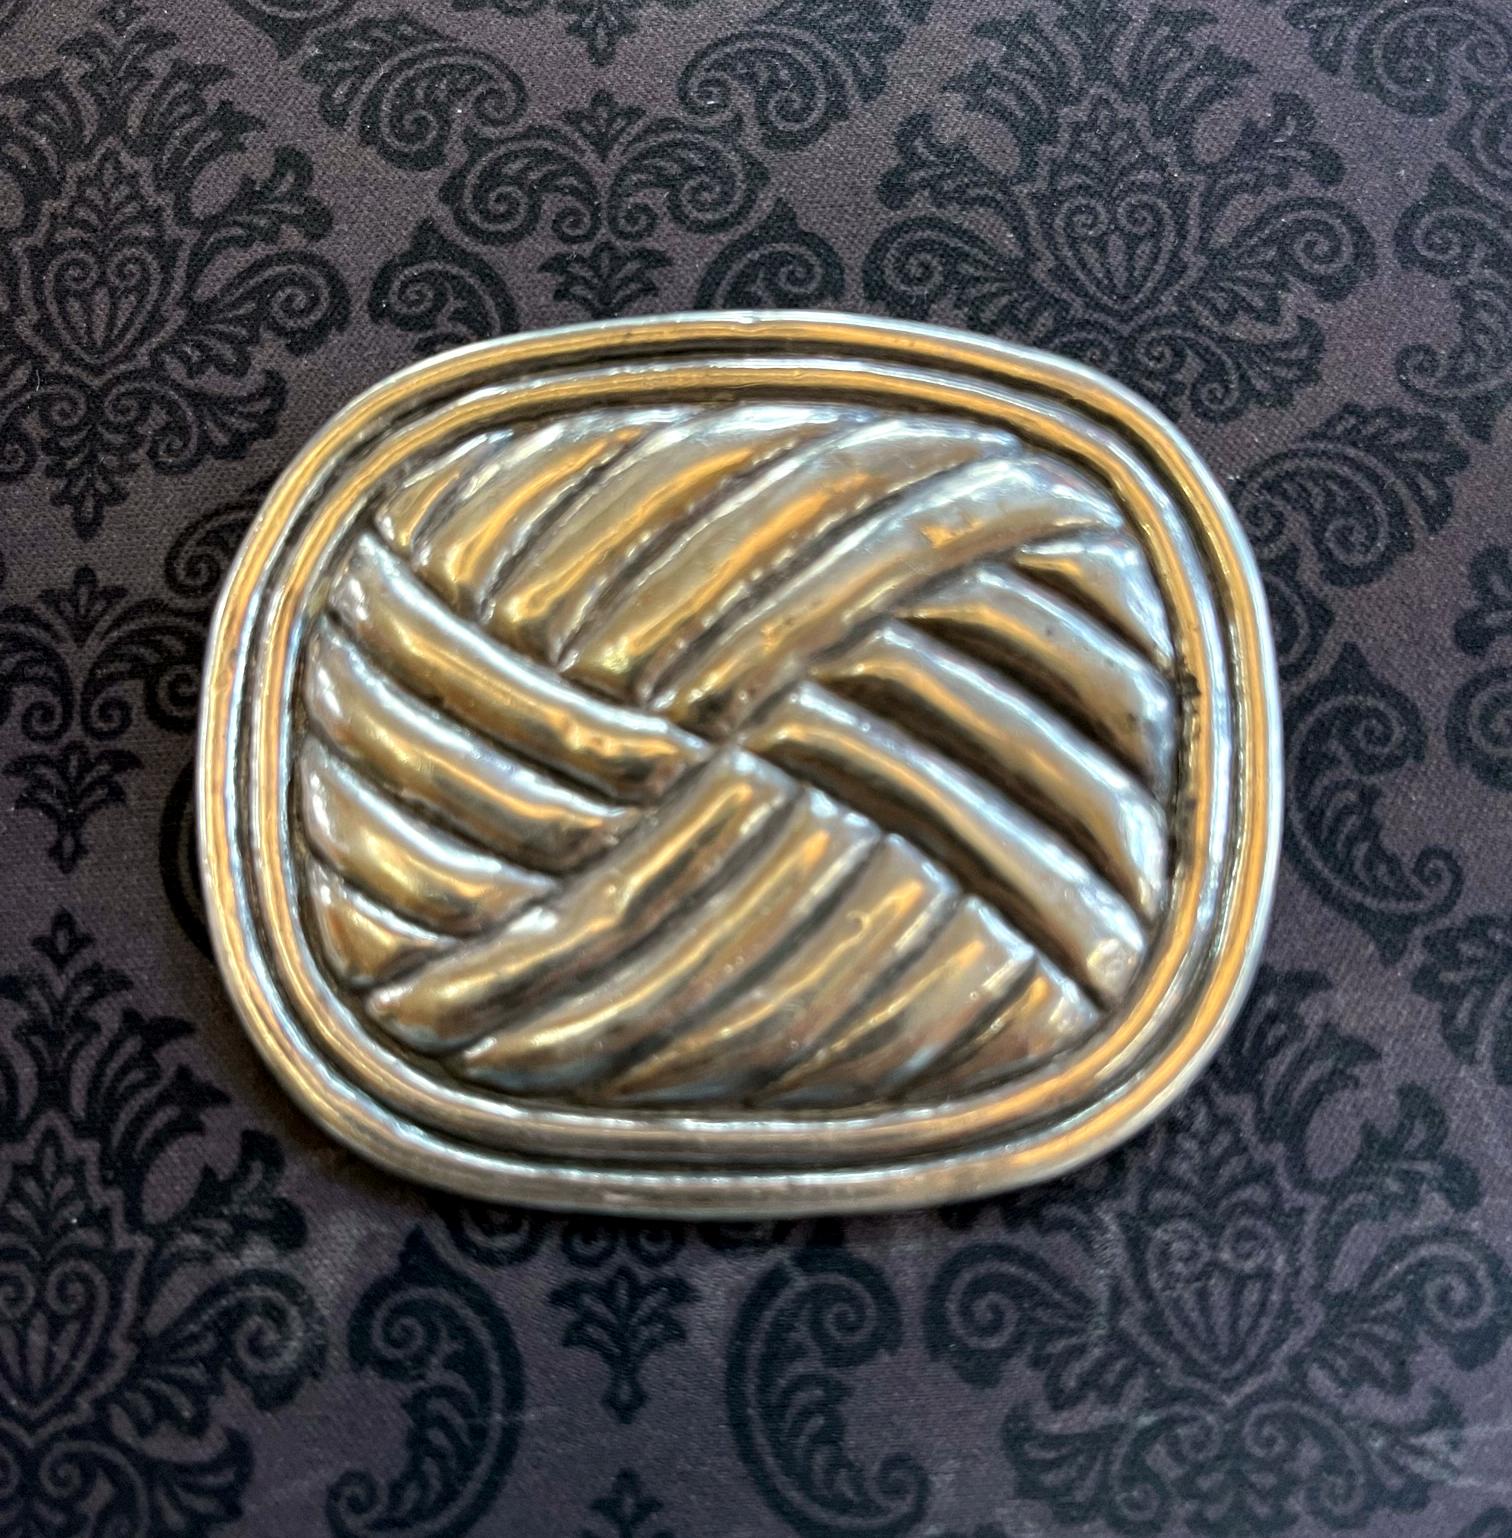 A modernistic sterling silver brooch by William Spratling from the first period 1940-1944. Made in his studio in Taxco, Mexico. The brooch features an abstract woven motif within a border, inspired by indigenous basketry. Stamped verso for William